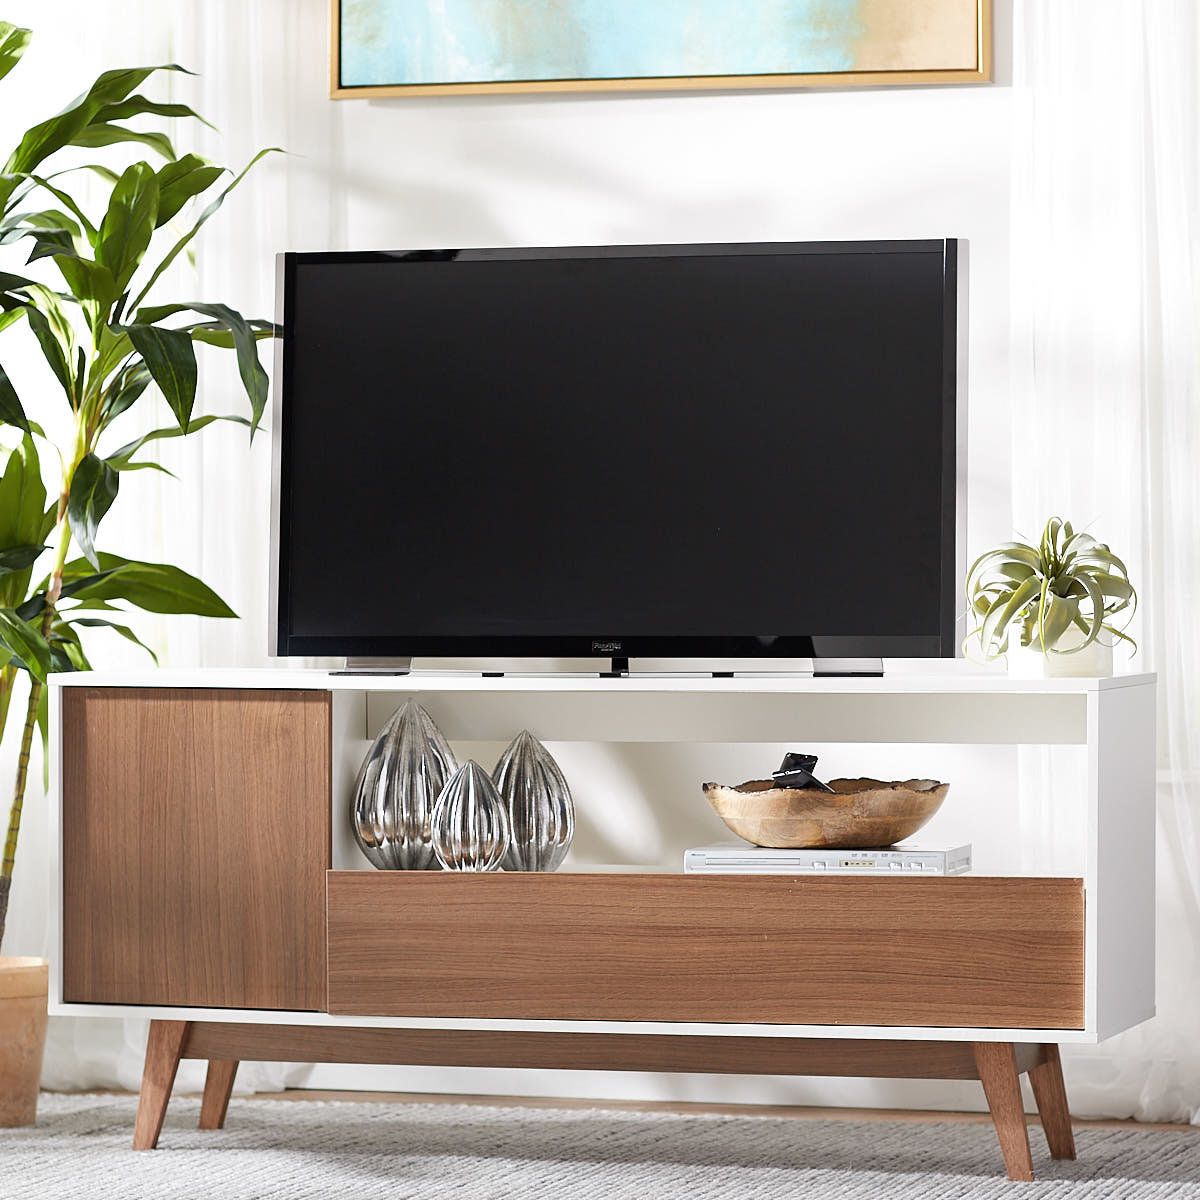 Langley Street Quincy Tv Stand For Tvs Up To 65" & Reviews | Wayfair Pertaining To Draper 62 Inch Tv Stands (Photo 11 of 30)